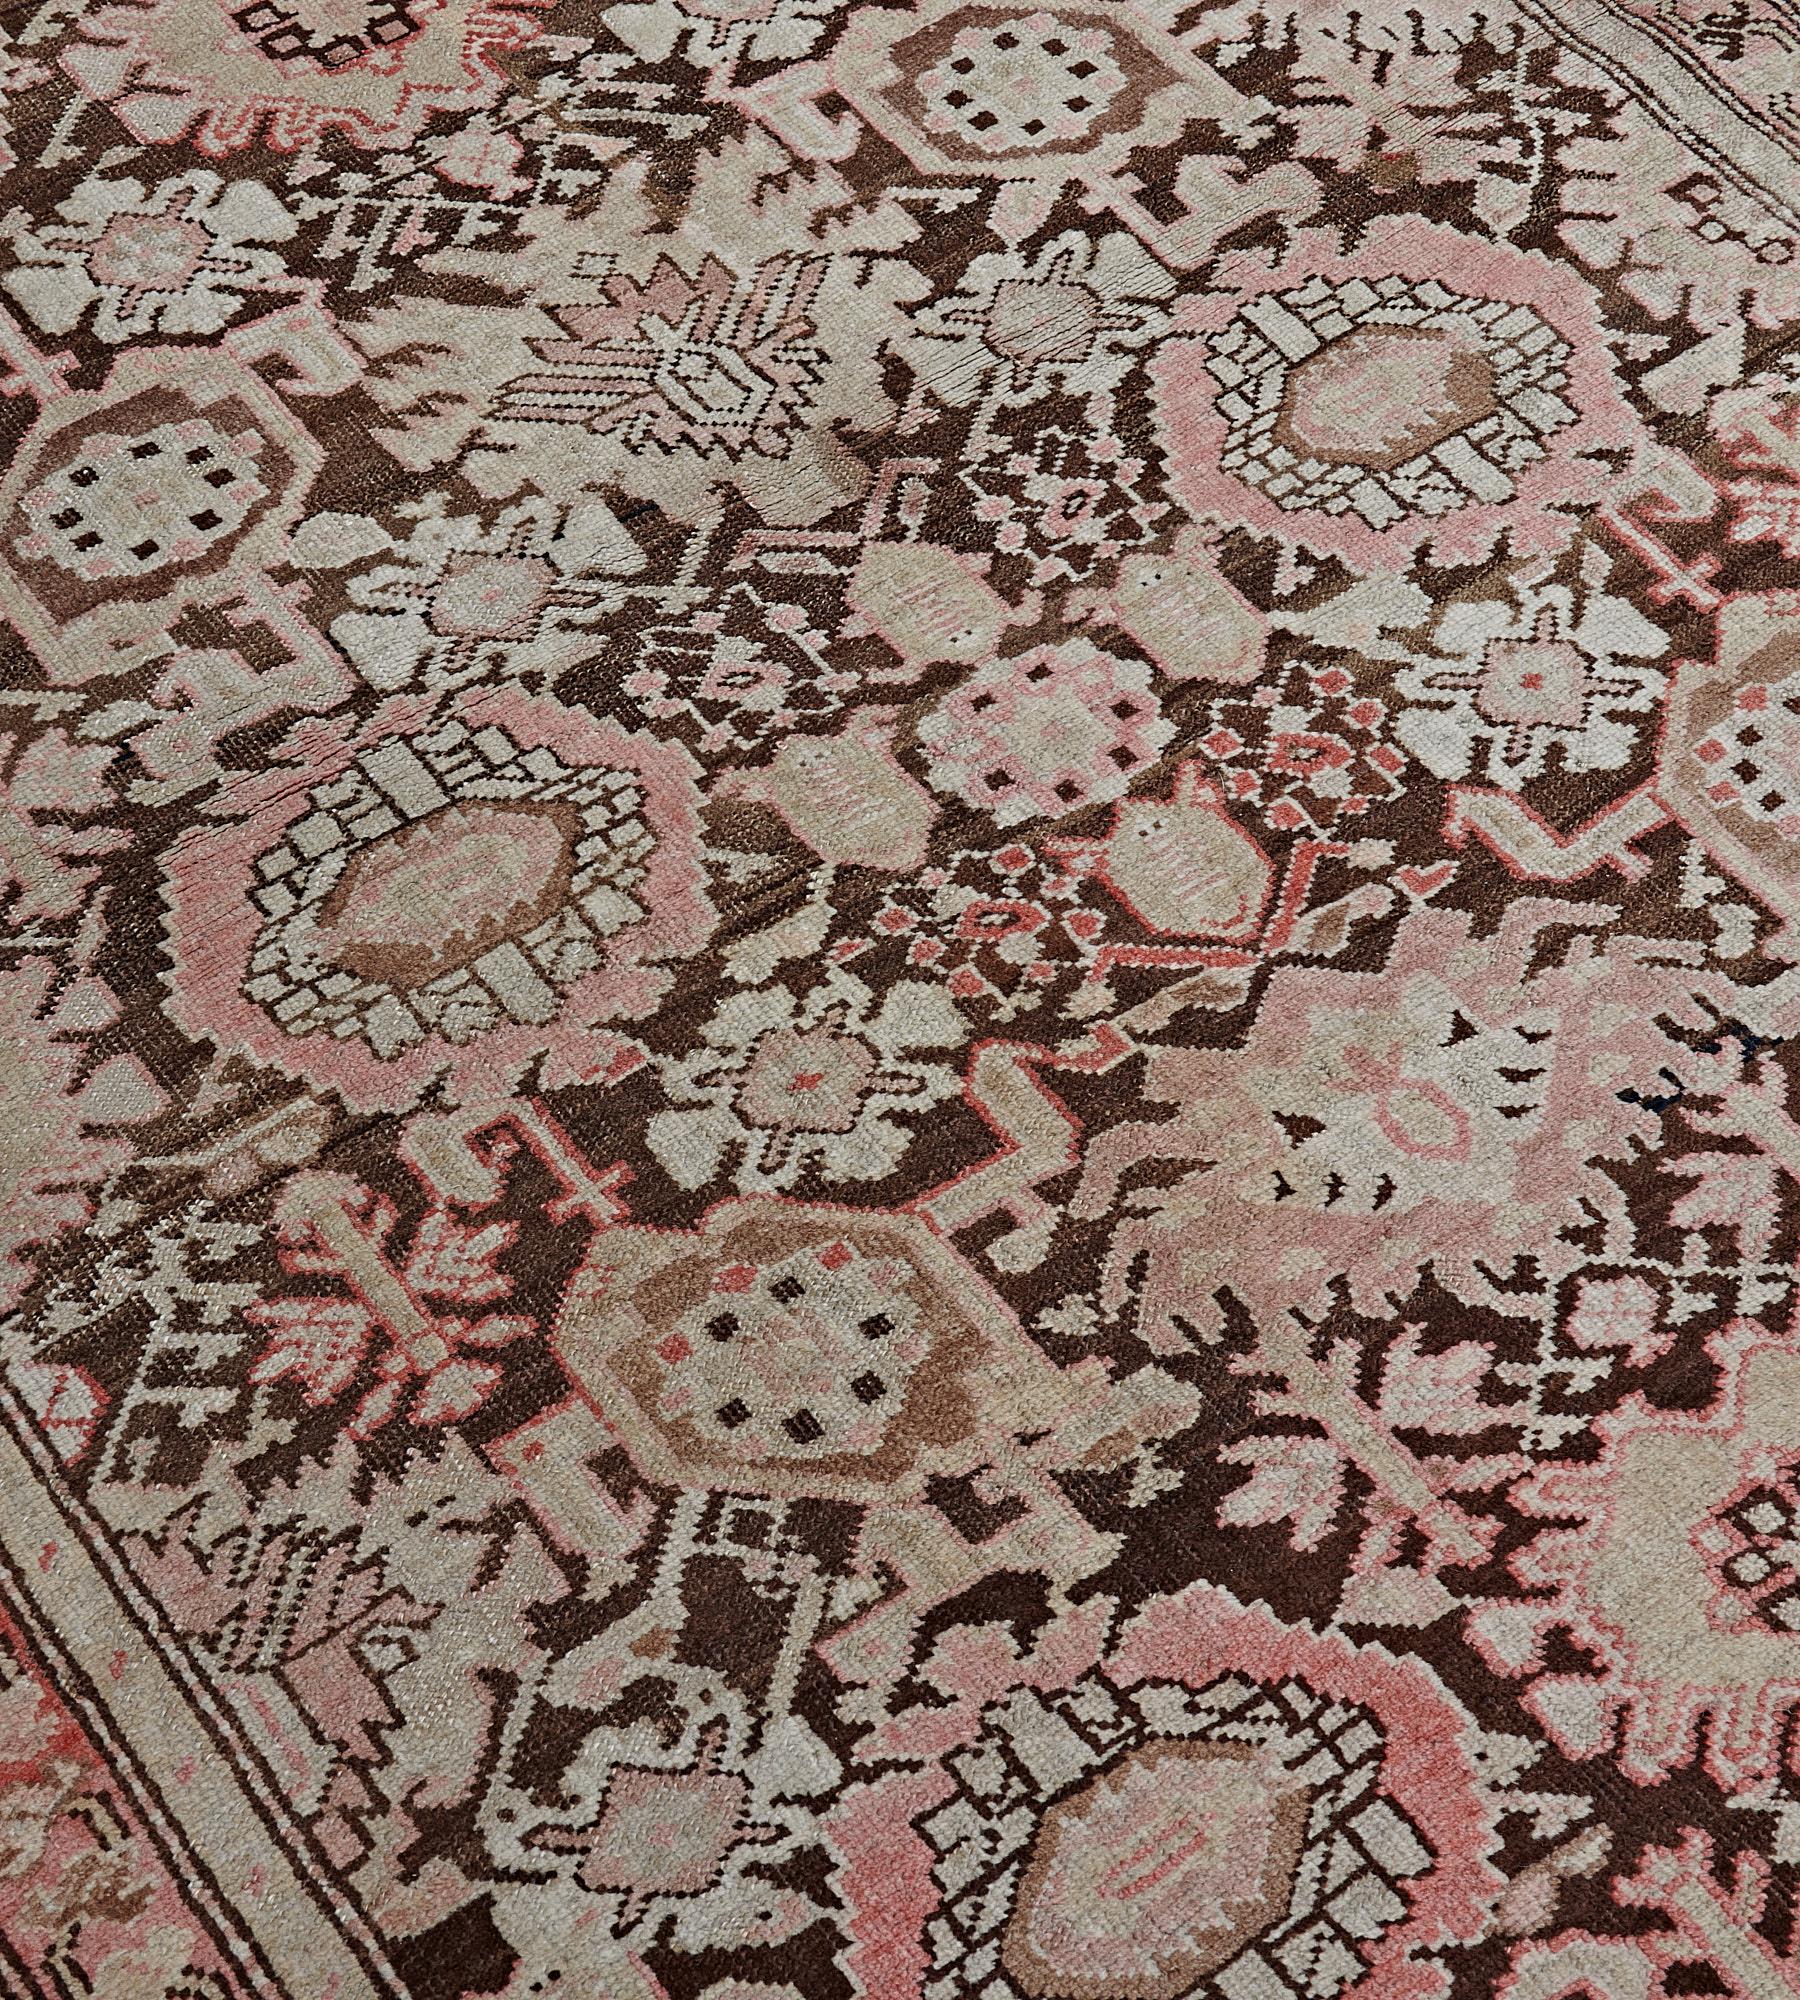 This antique, circa 1900, Caucasian Karabagh runner has a shaded chocolate-brown field with an overall dense dusty-pink, fox-brown and ivory bold palmette and floral vine, in a shaded tomato-red border of angular floral vine between ivory similar